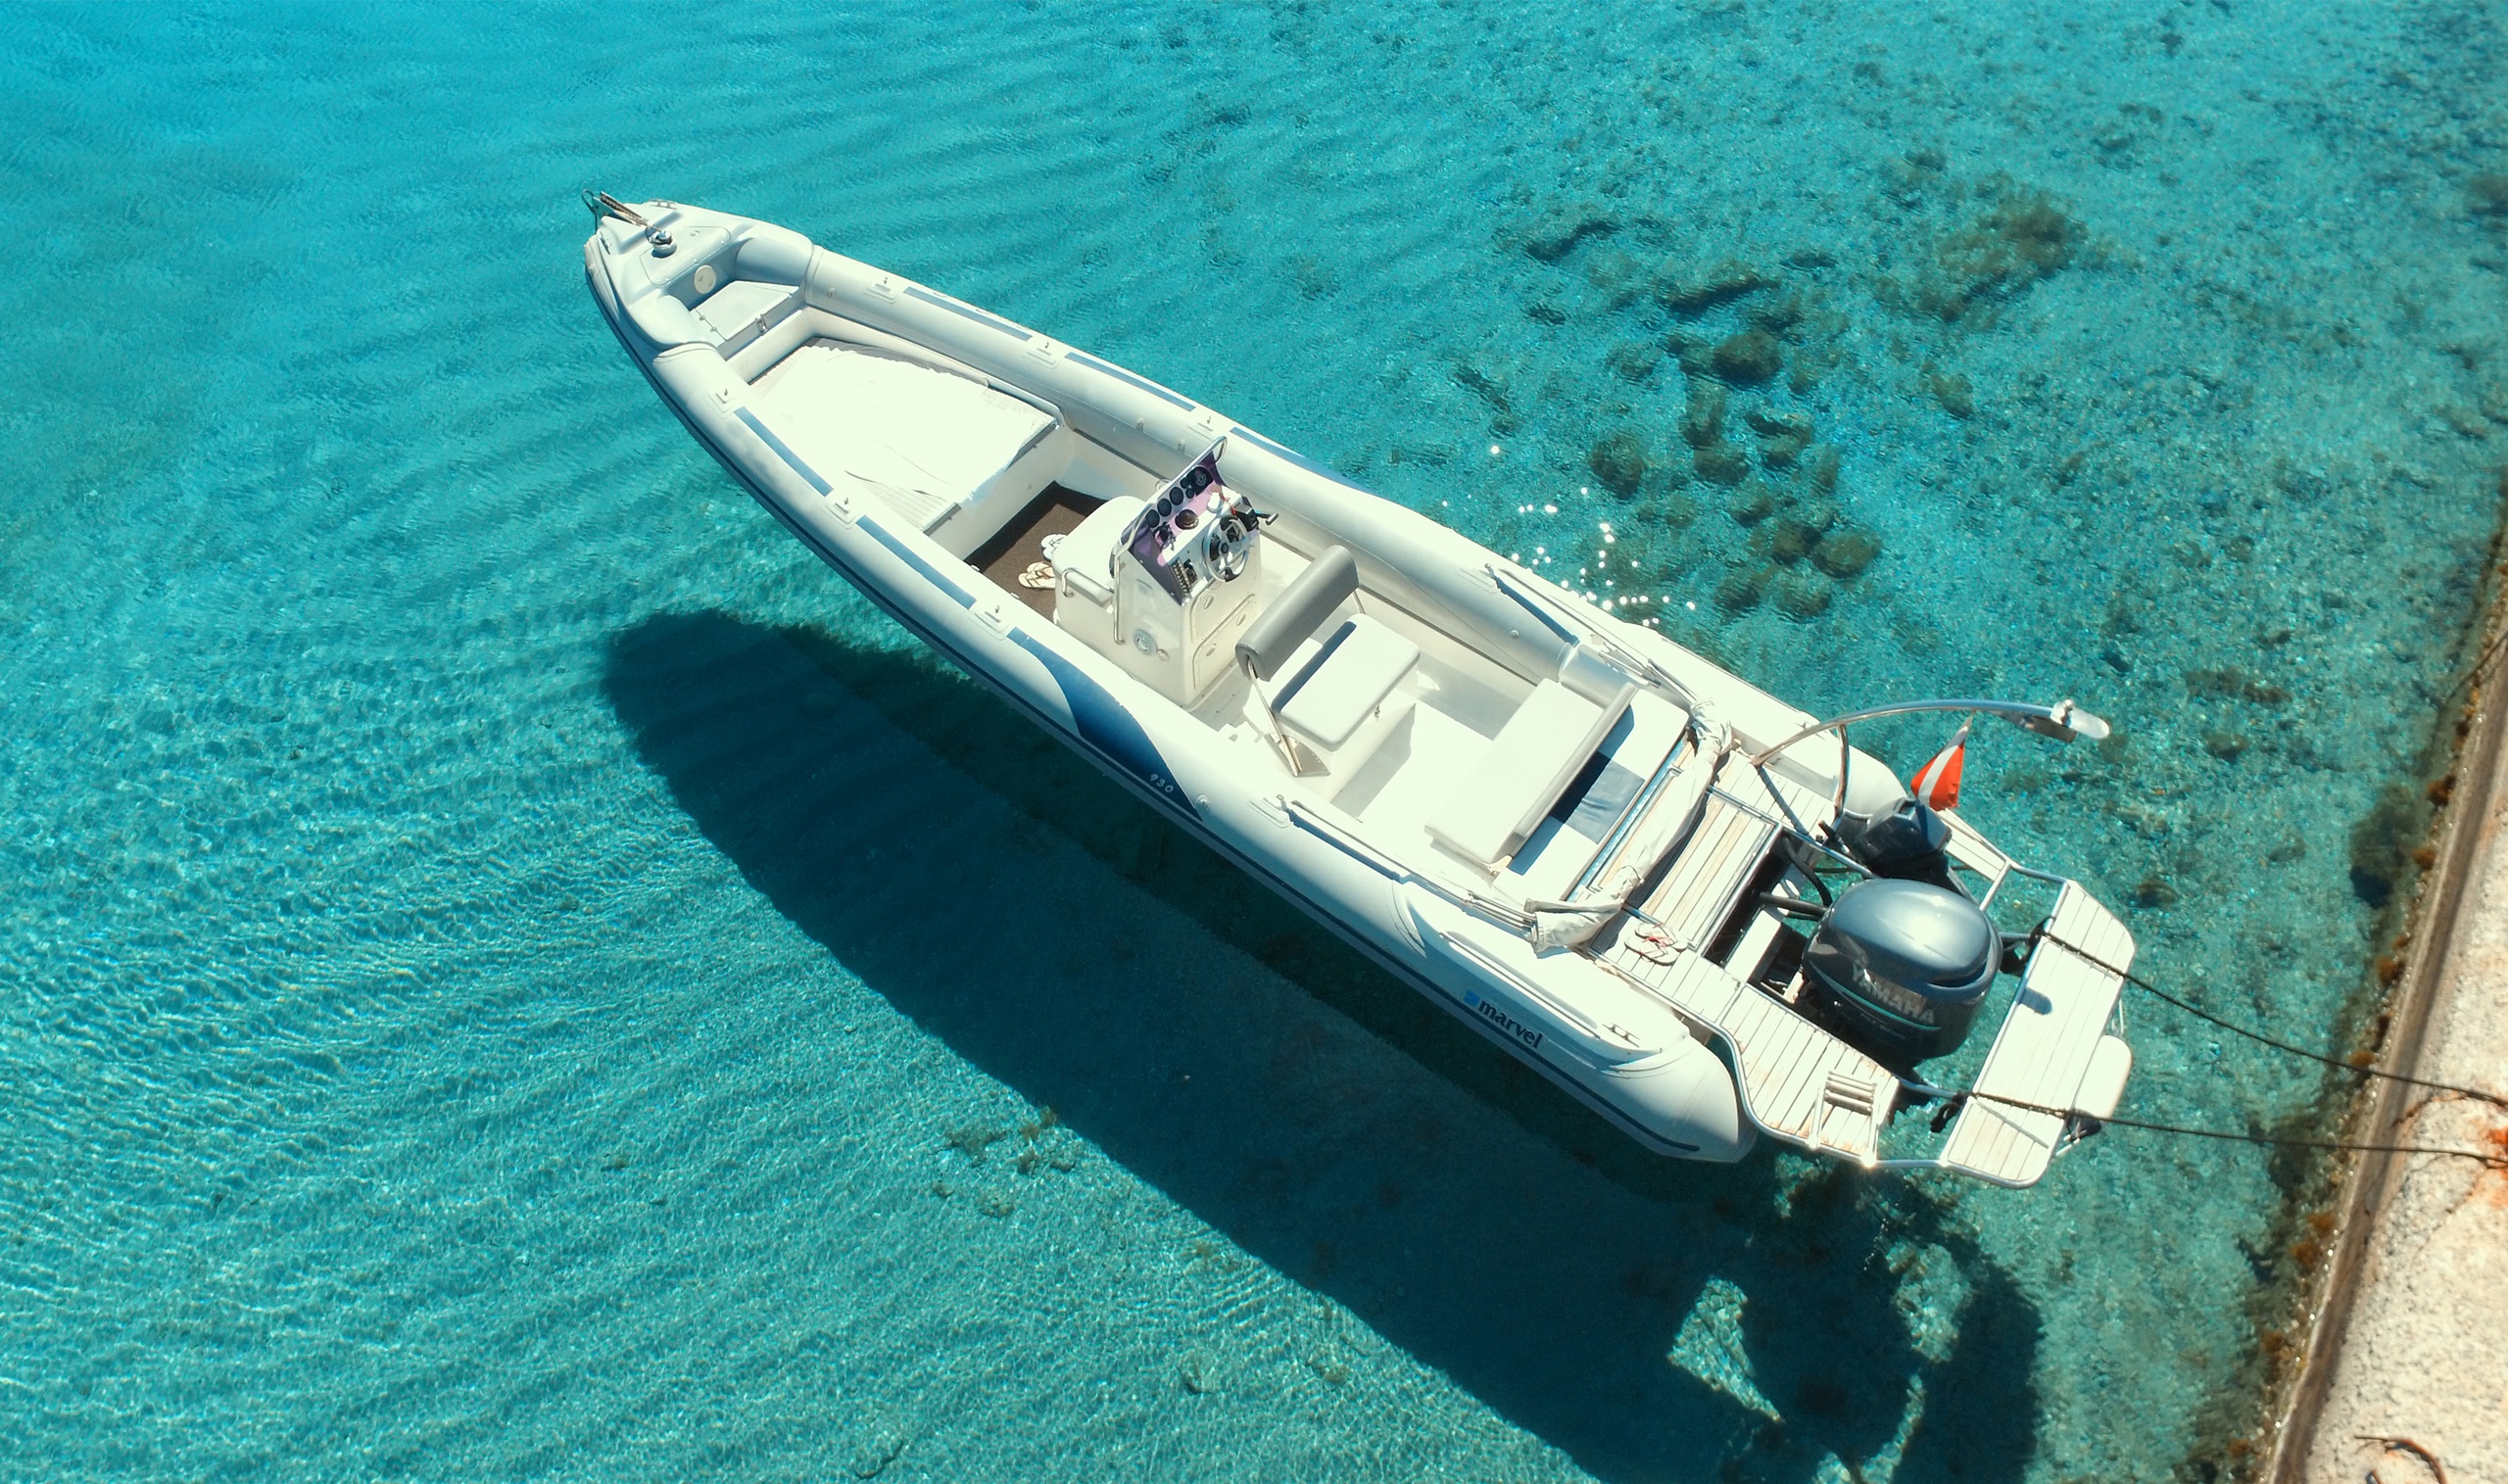 Boat Rental from Chania in Crete